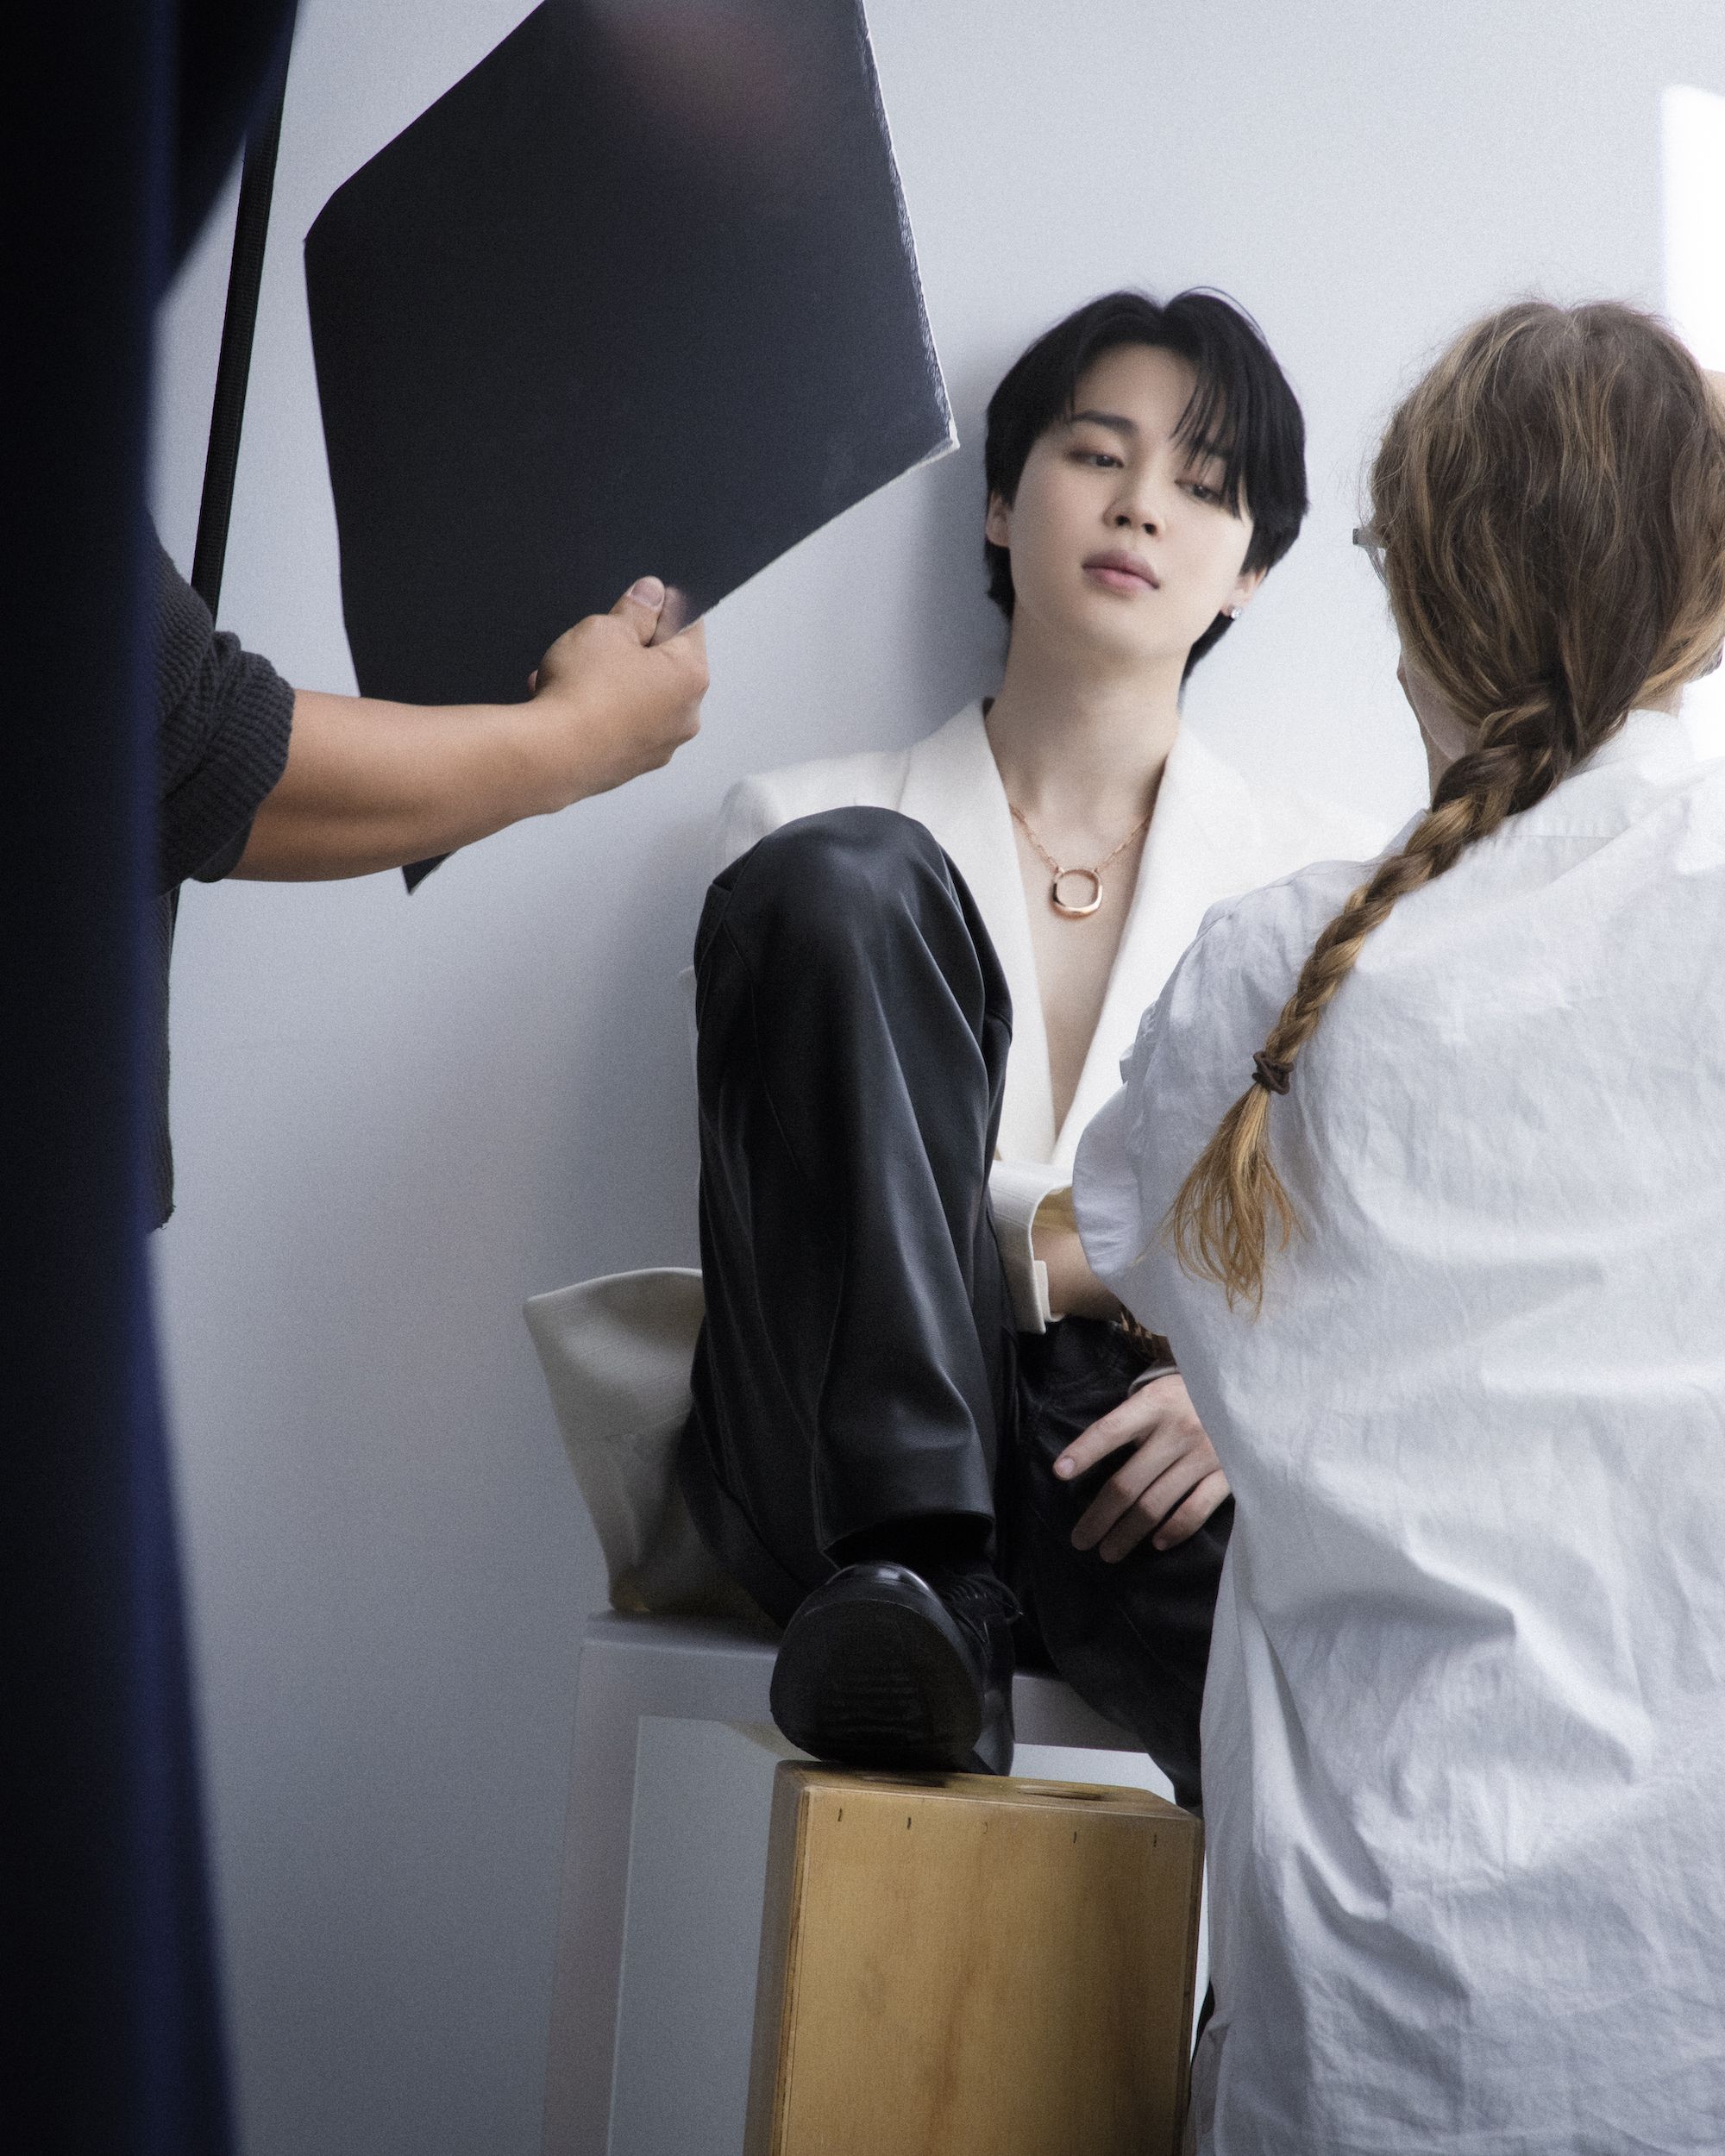 Watch BTS' Jimin star in a new campaign for Tiffany & Co.